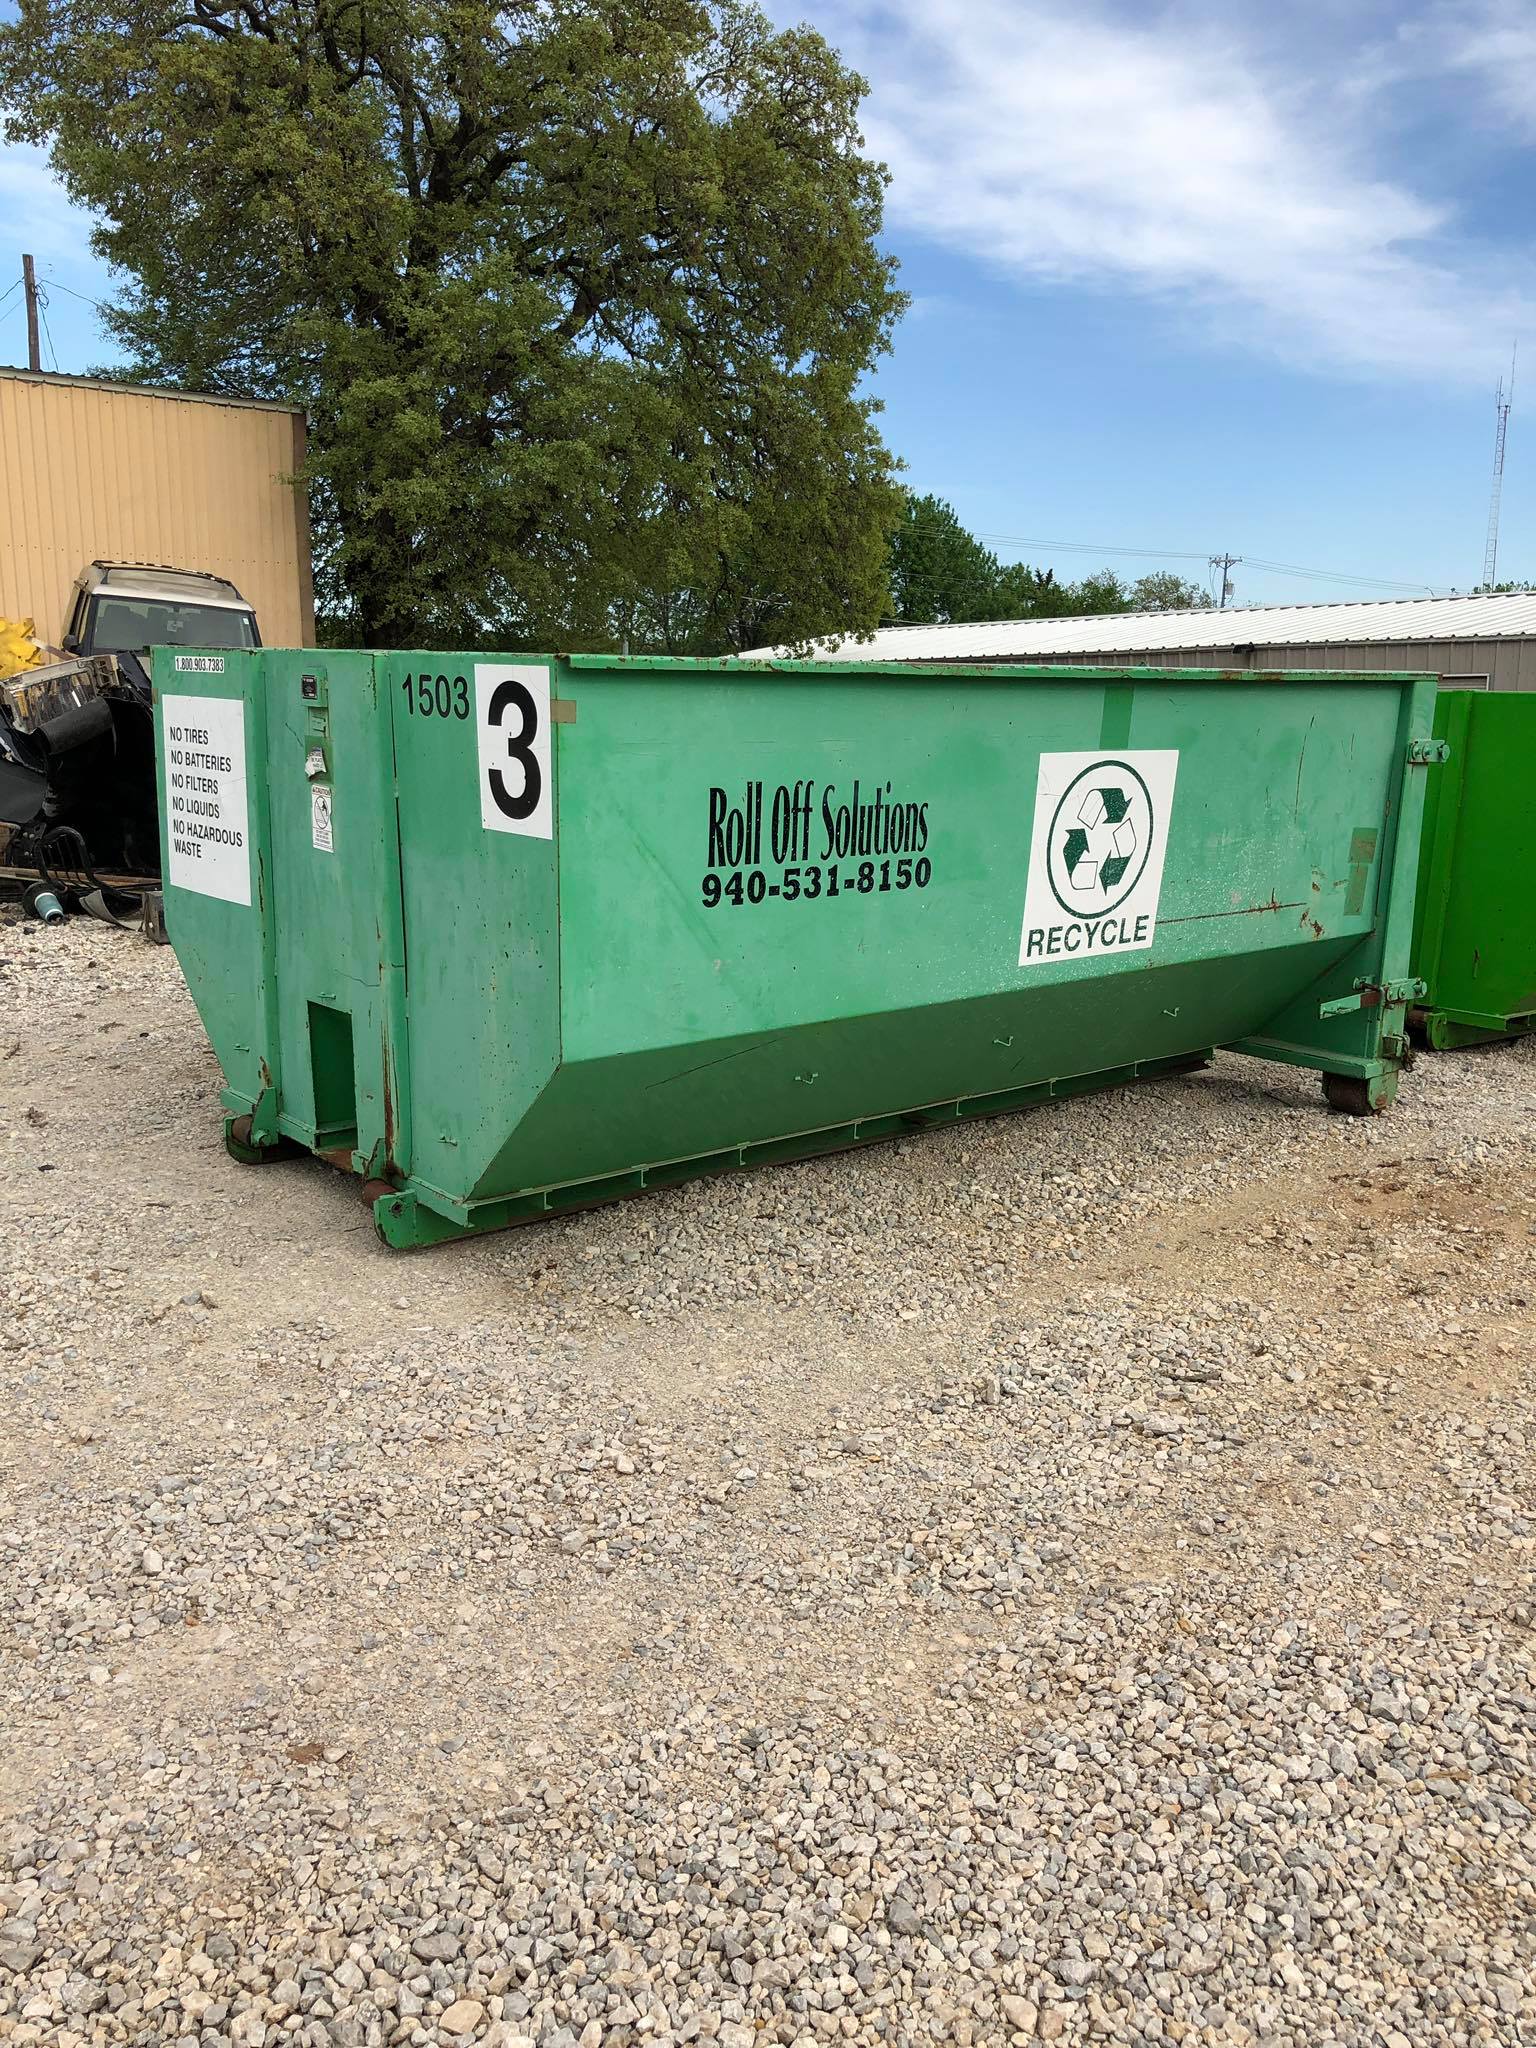 How Do I Find A Small Dumpster Rental Service?